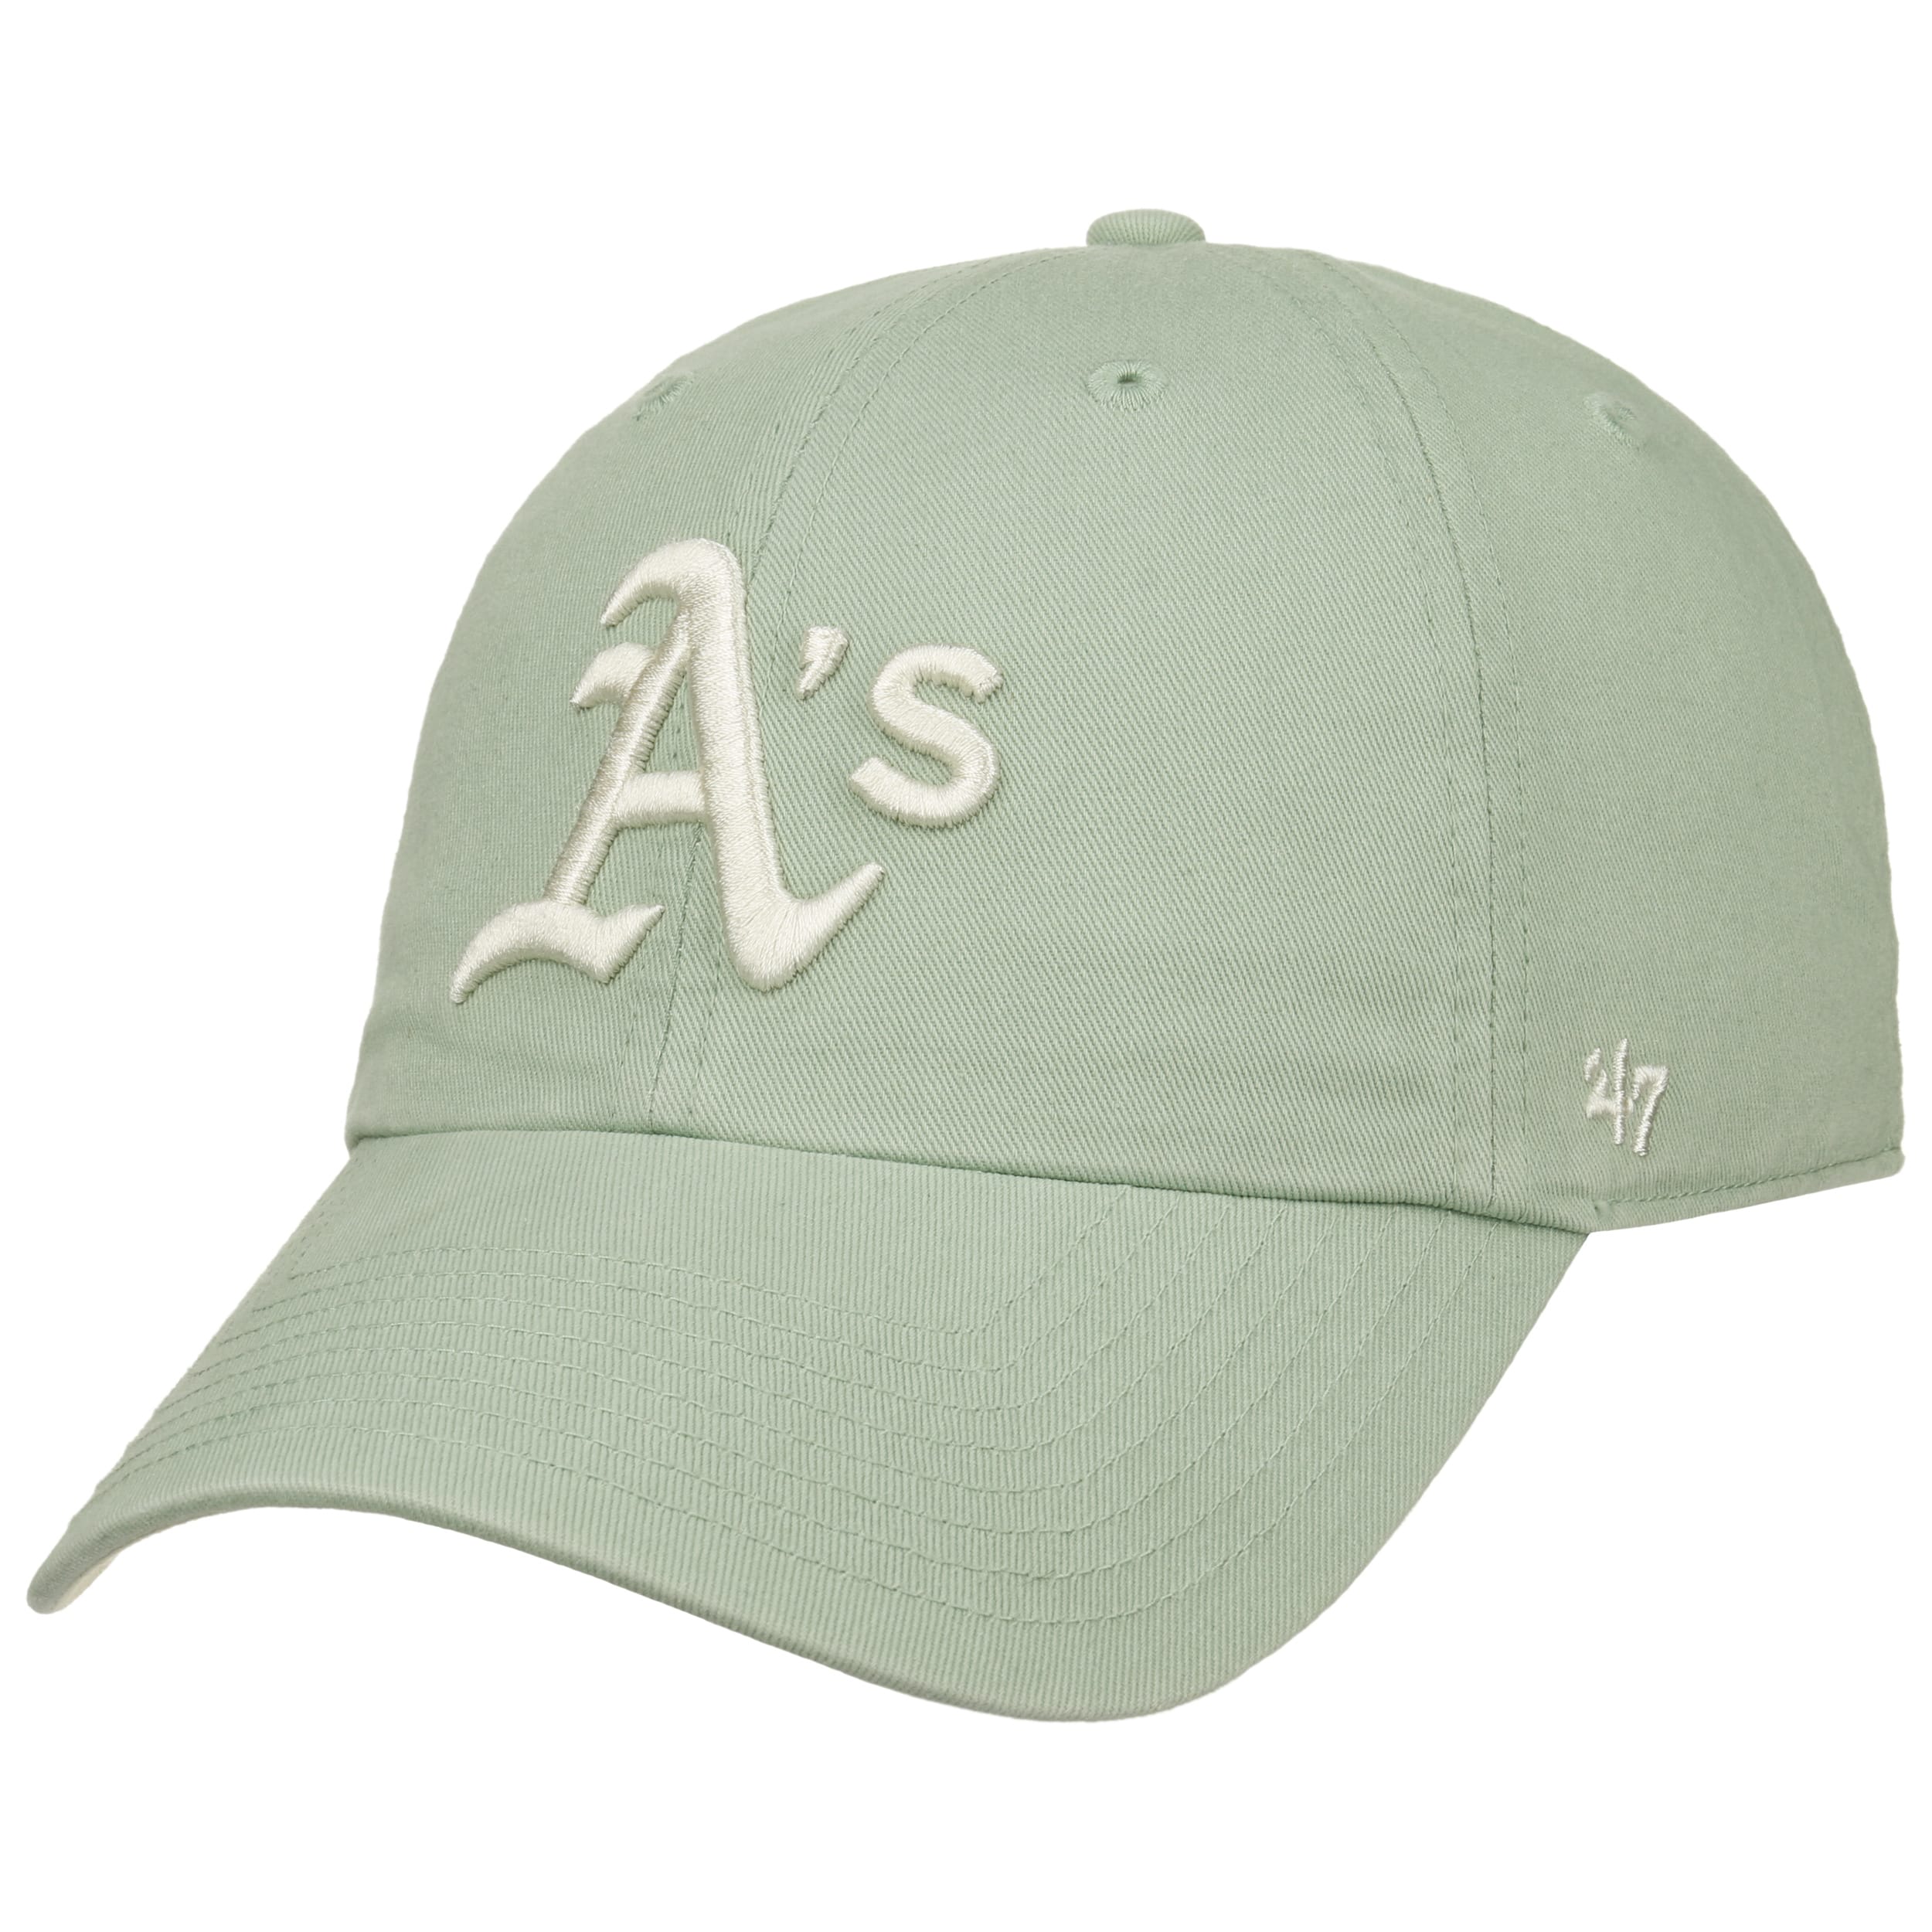 47 Brand Clean Up Hat